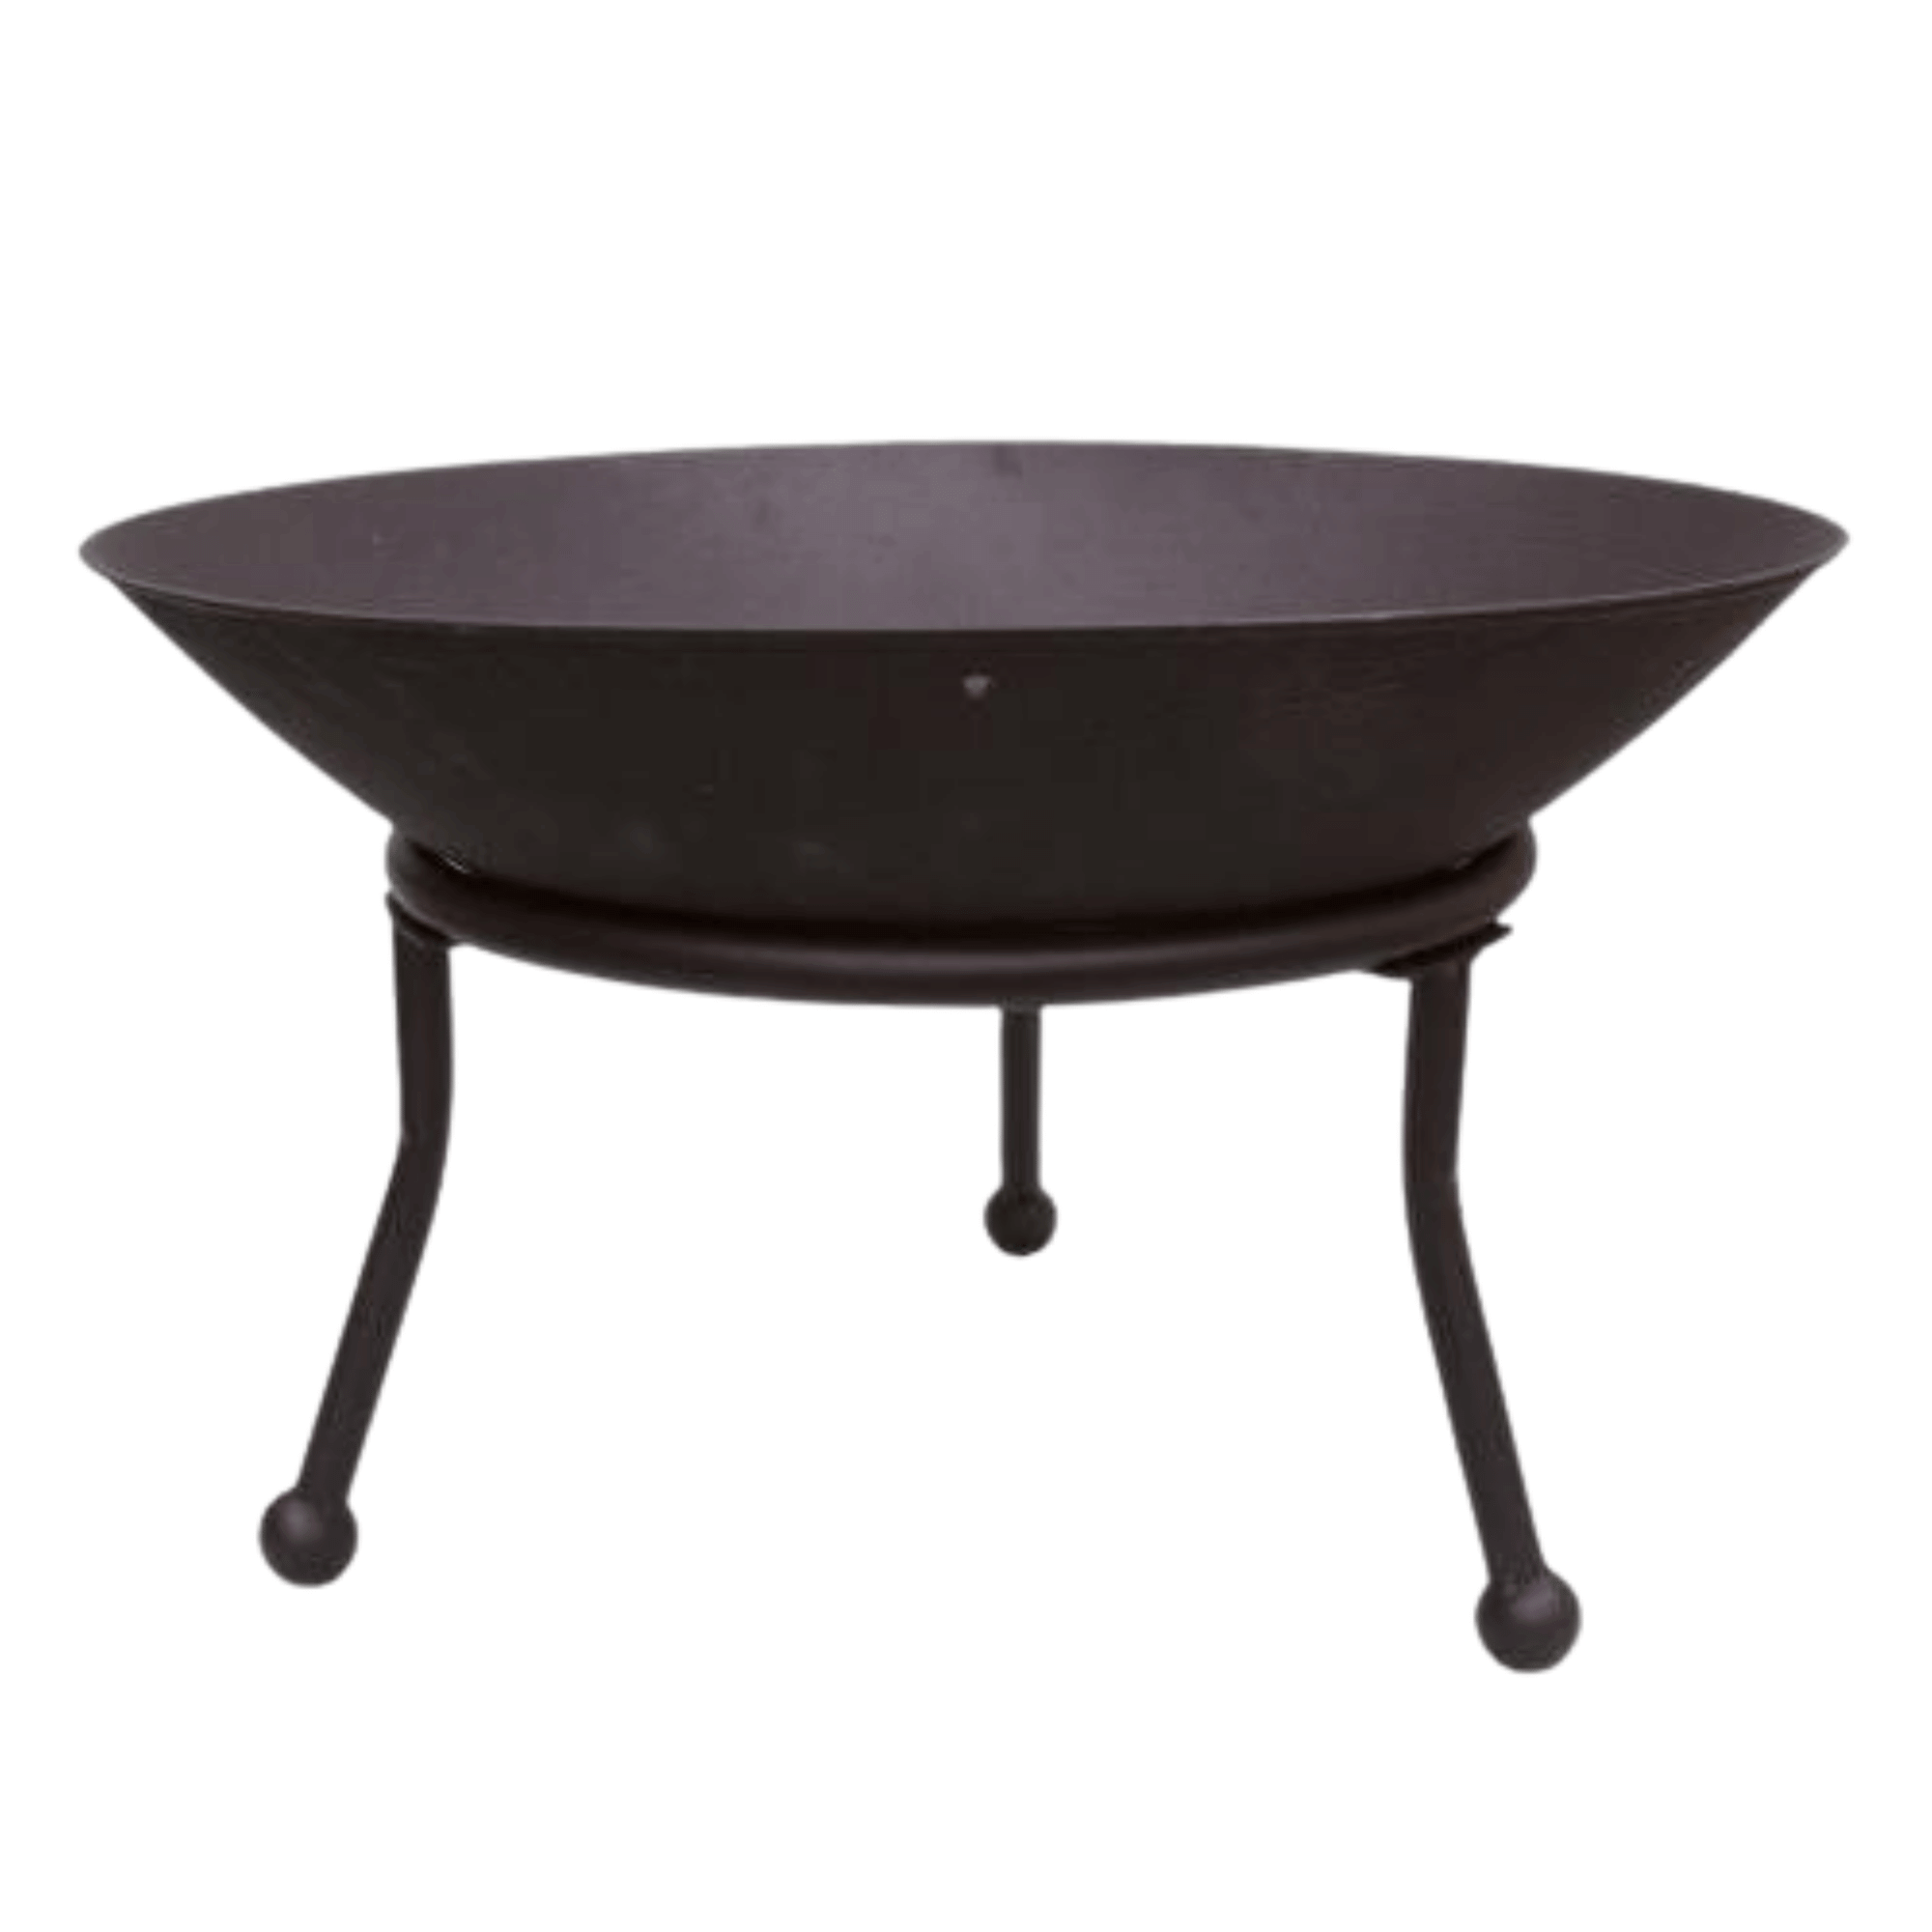 Small Cast Iron Fire Pit/Bowl - Perfect Patio